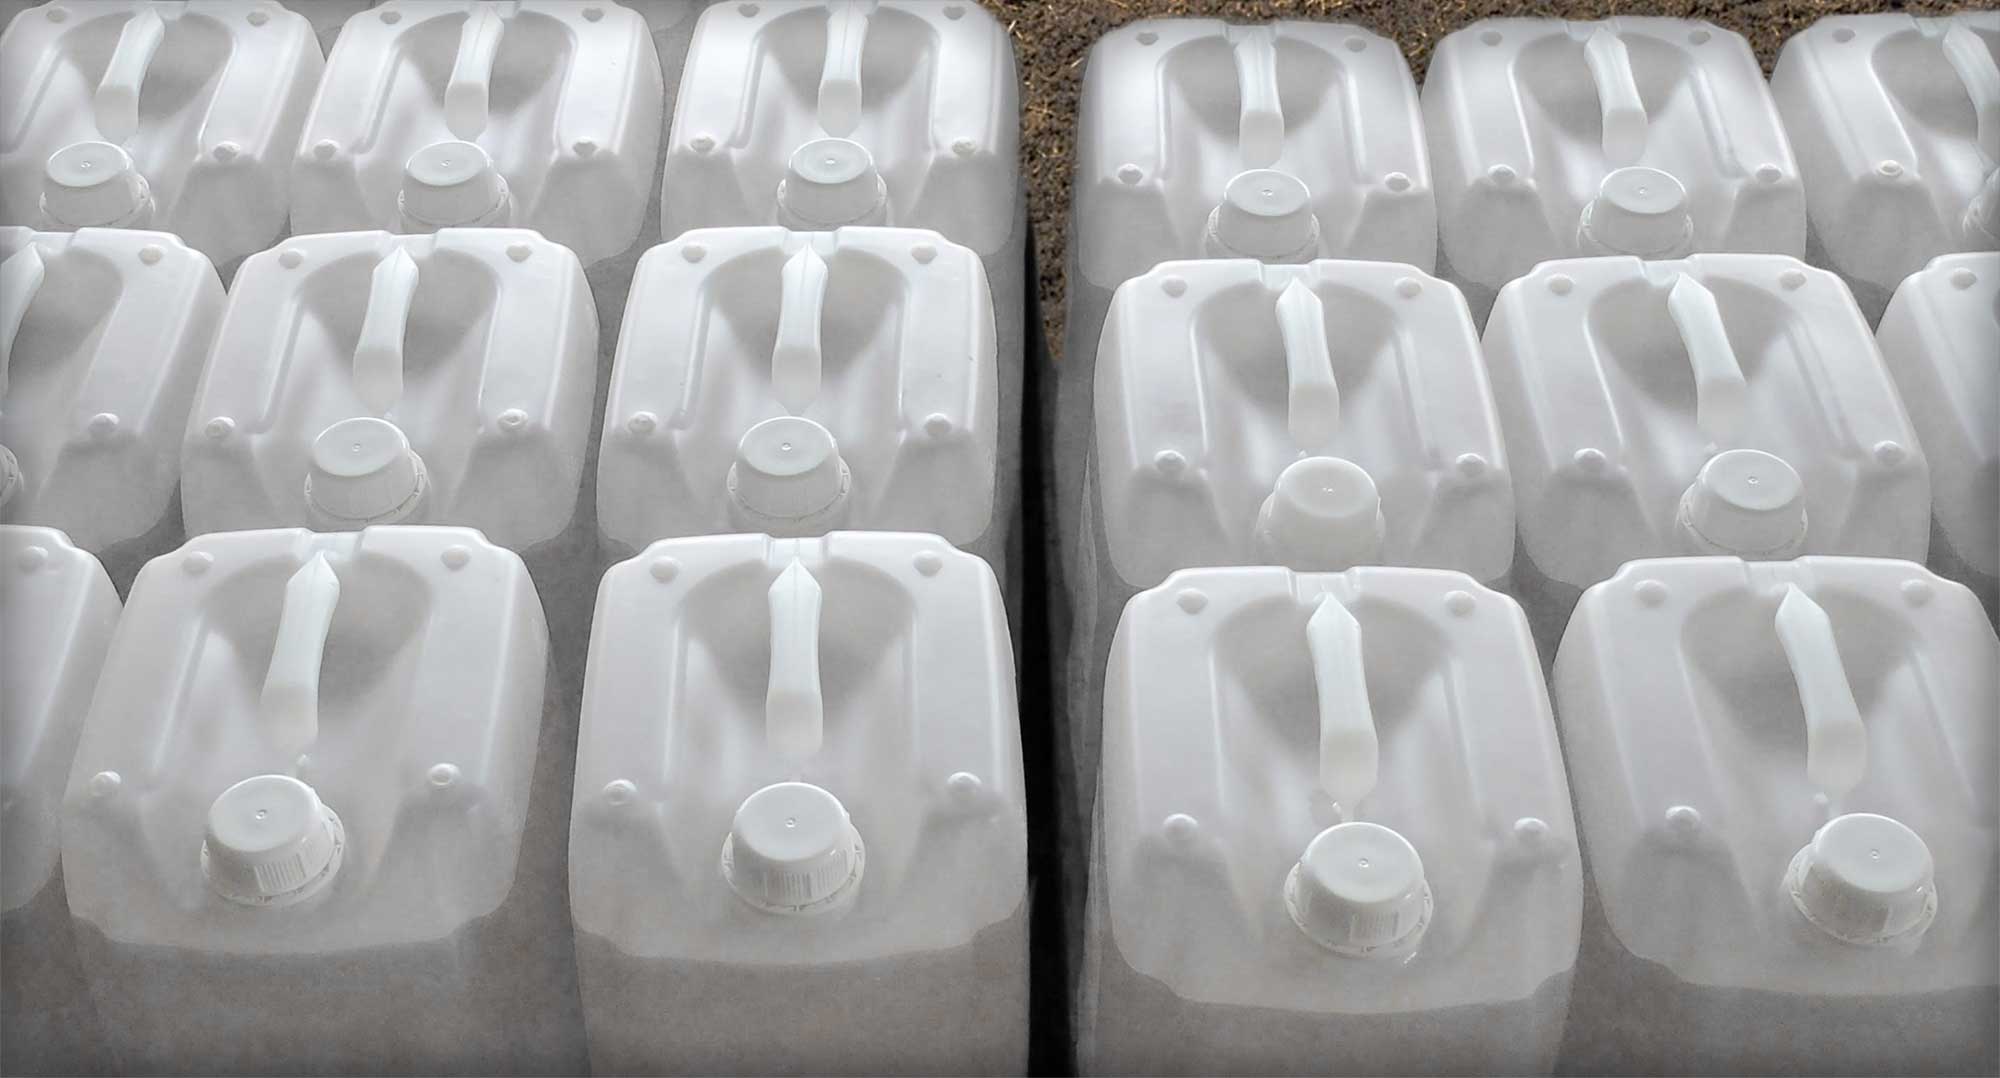 Rows of empty white, plastic pesticide containers.